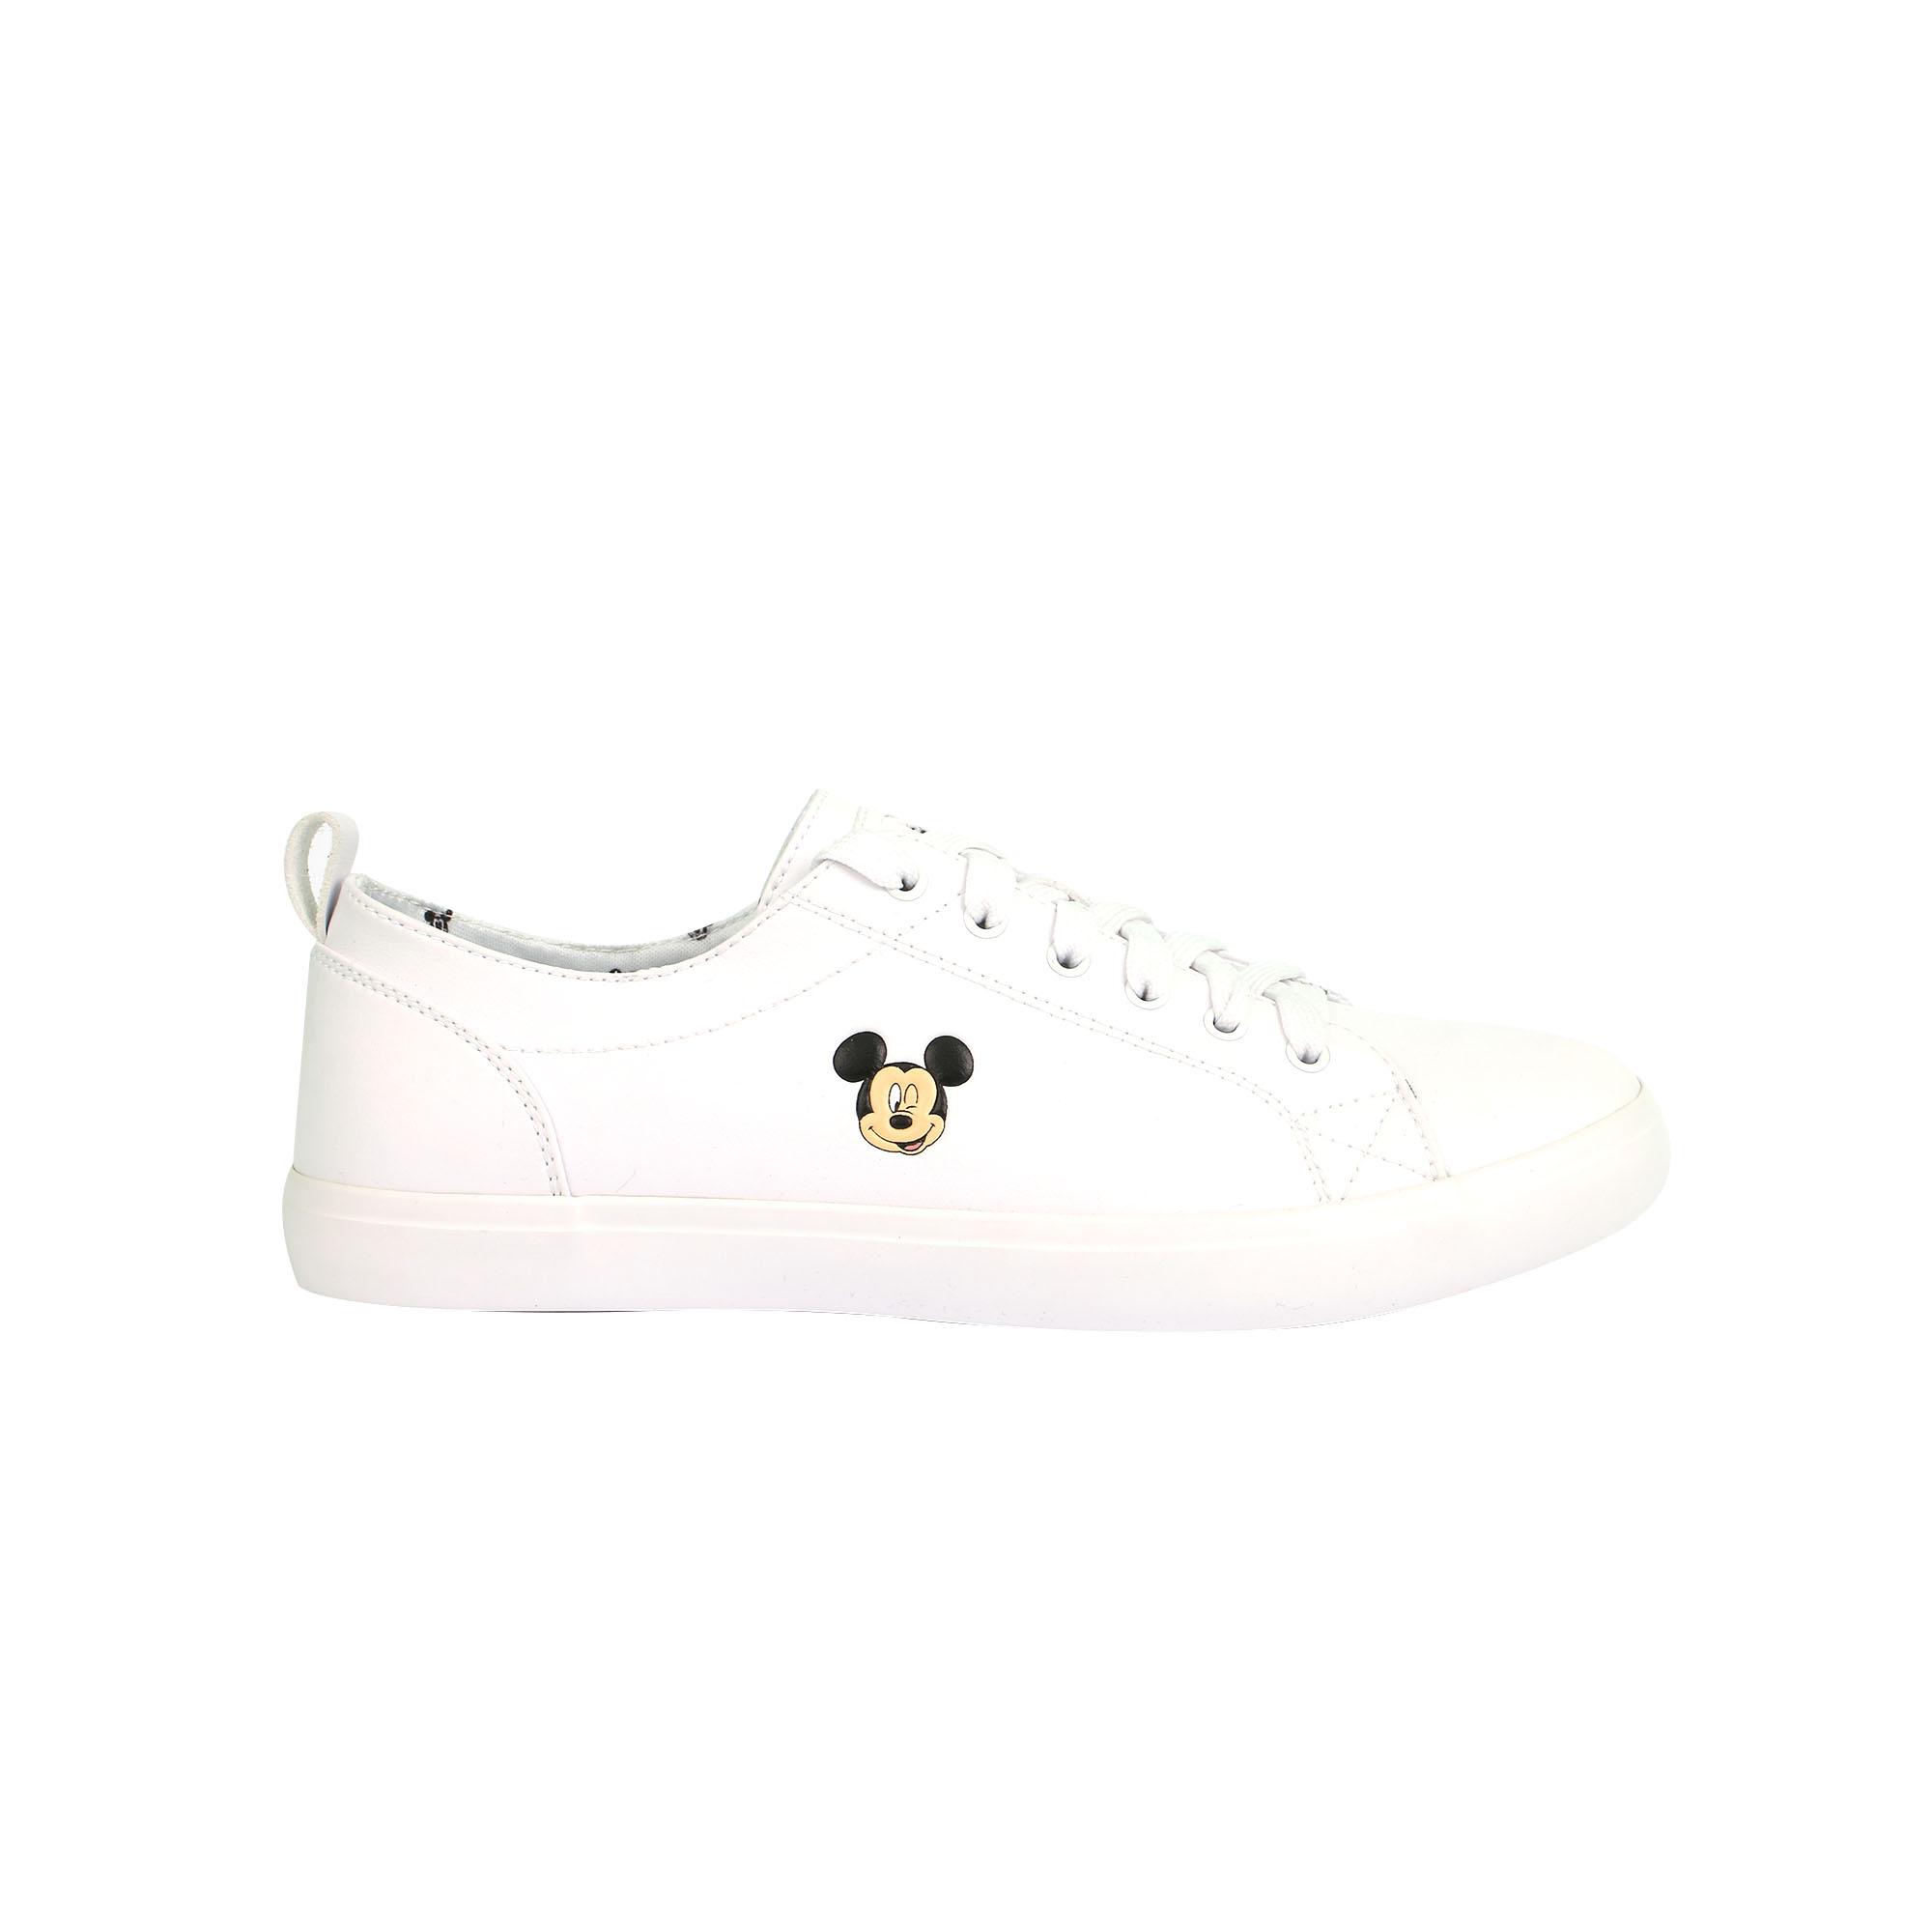 world balance white shoes for ladies